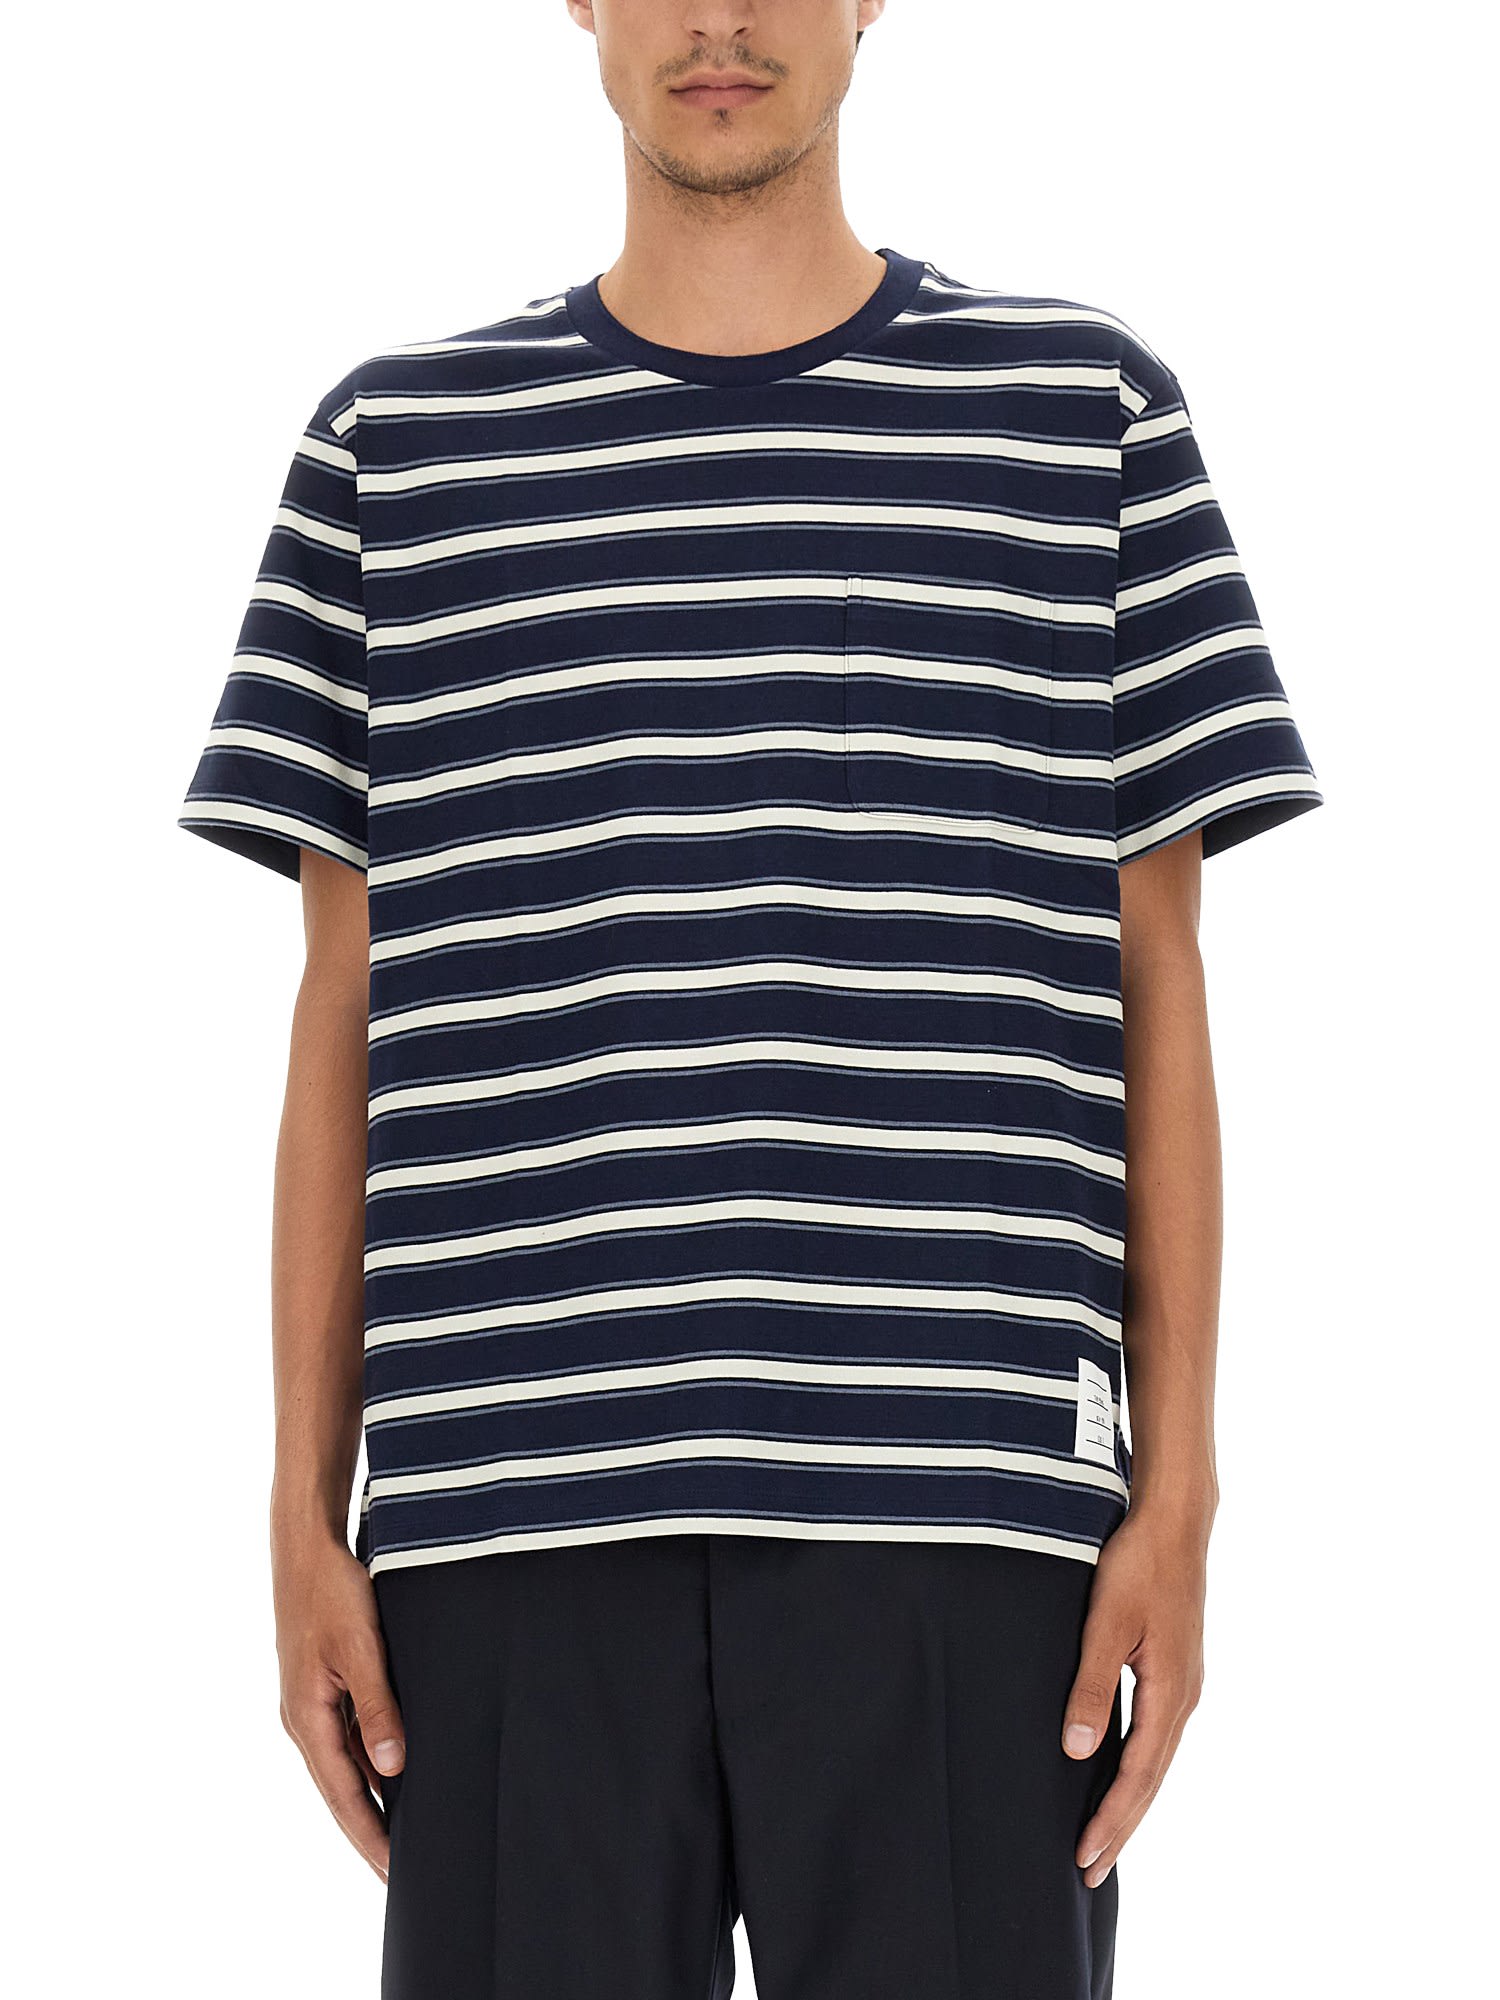 THOM BROWNE T-SHRIT WITH STRIPE PATTERN